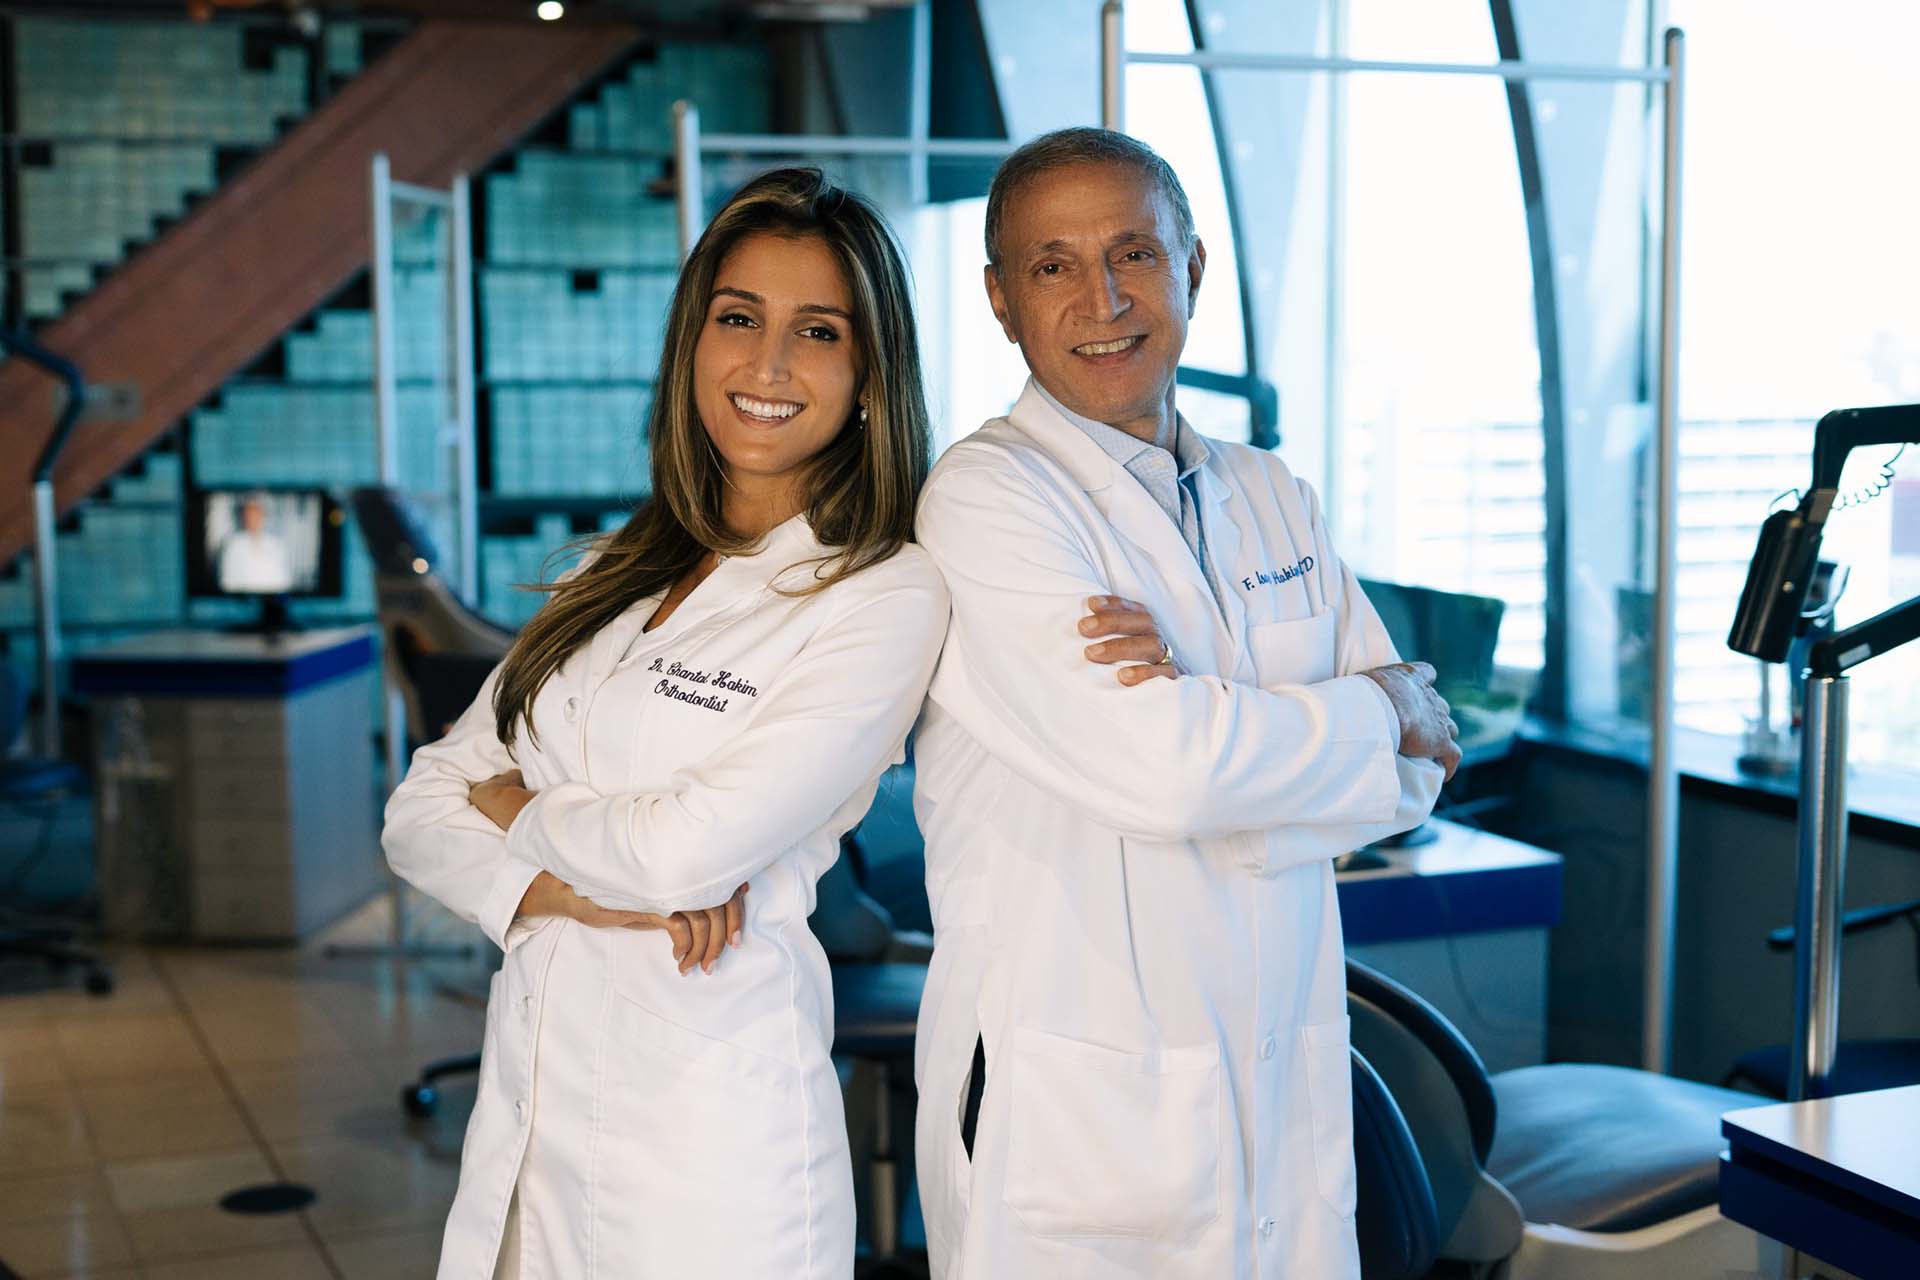 Dr. Chantal Hakim and Dr. F. Isaac Hakim at the Orthospaceship in Los Angeles, a Southern California orthodontic practice serving Beverly Hills.